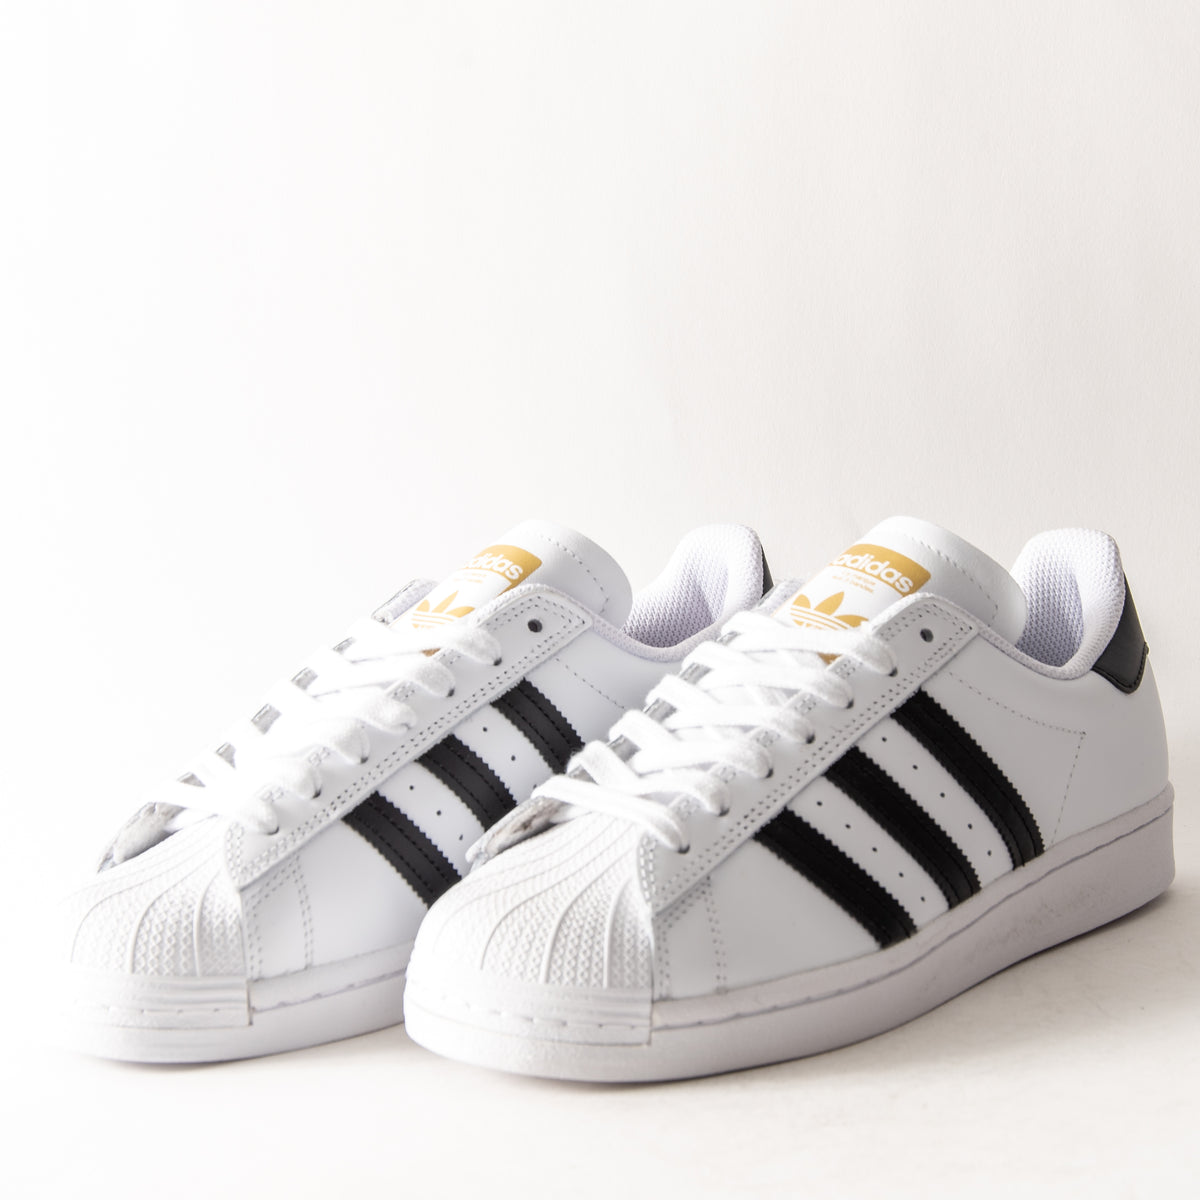 Adidas Superstar Shoes - White - 7.5